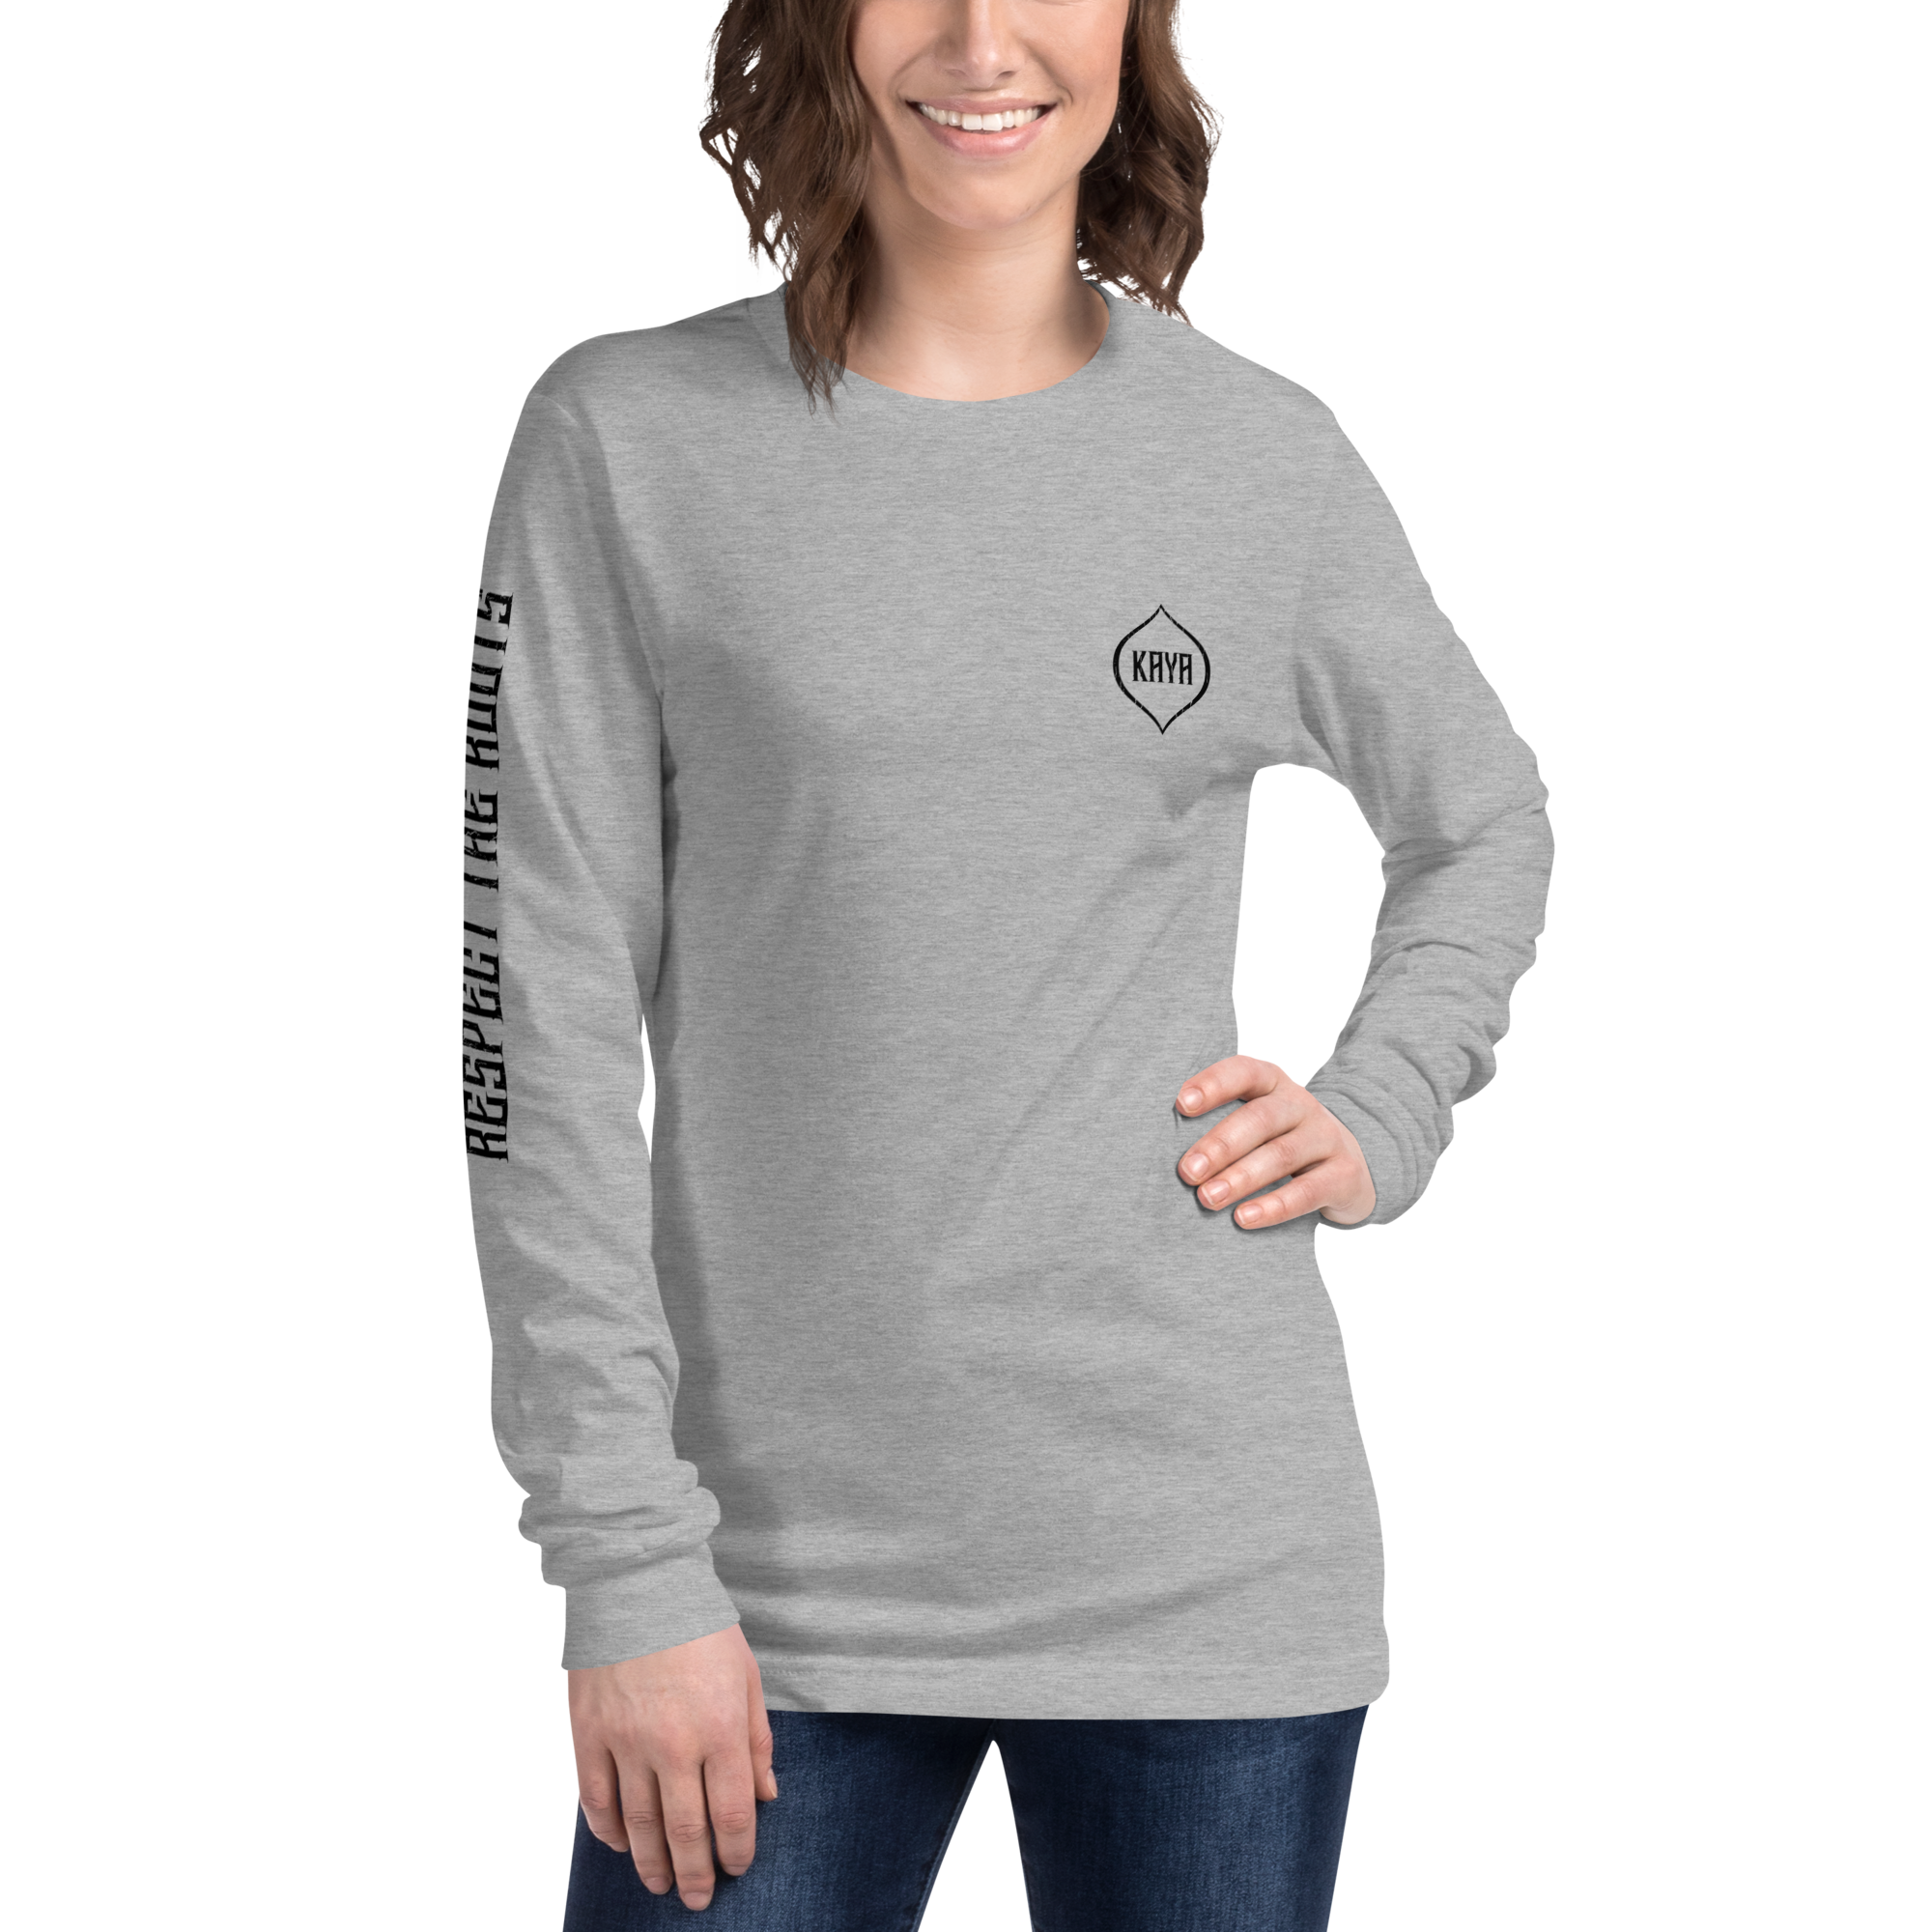 Unisex Long Sleeve Tee Respect the Roots